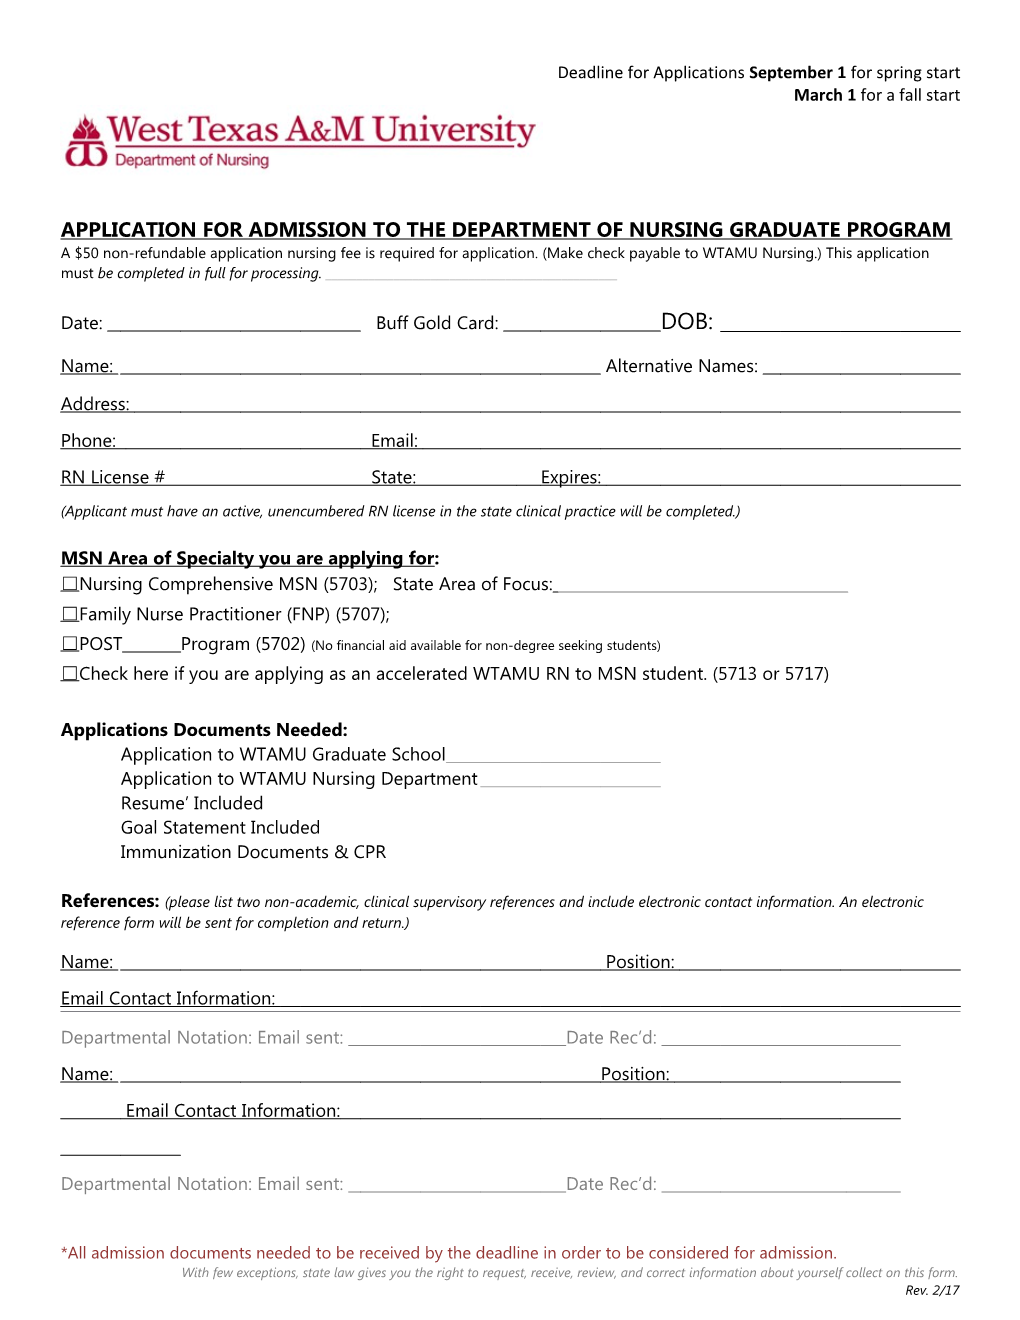 Application for Admission to the Department of Nursing Graduate Program